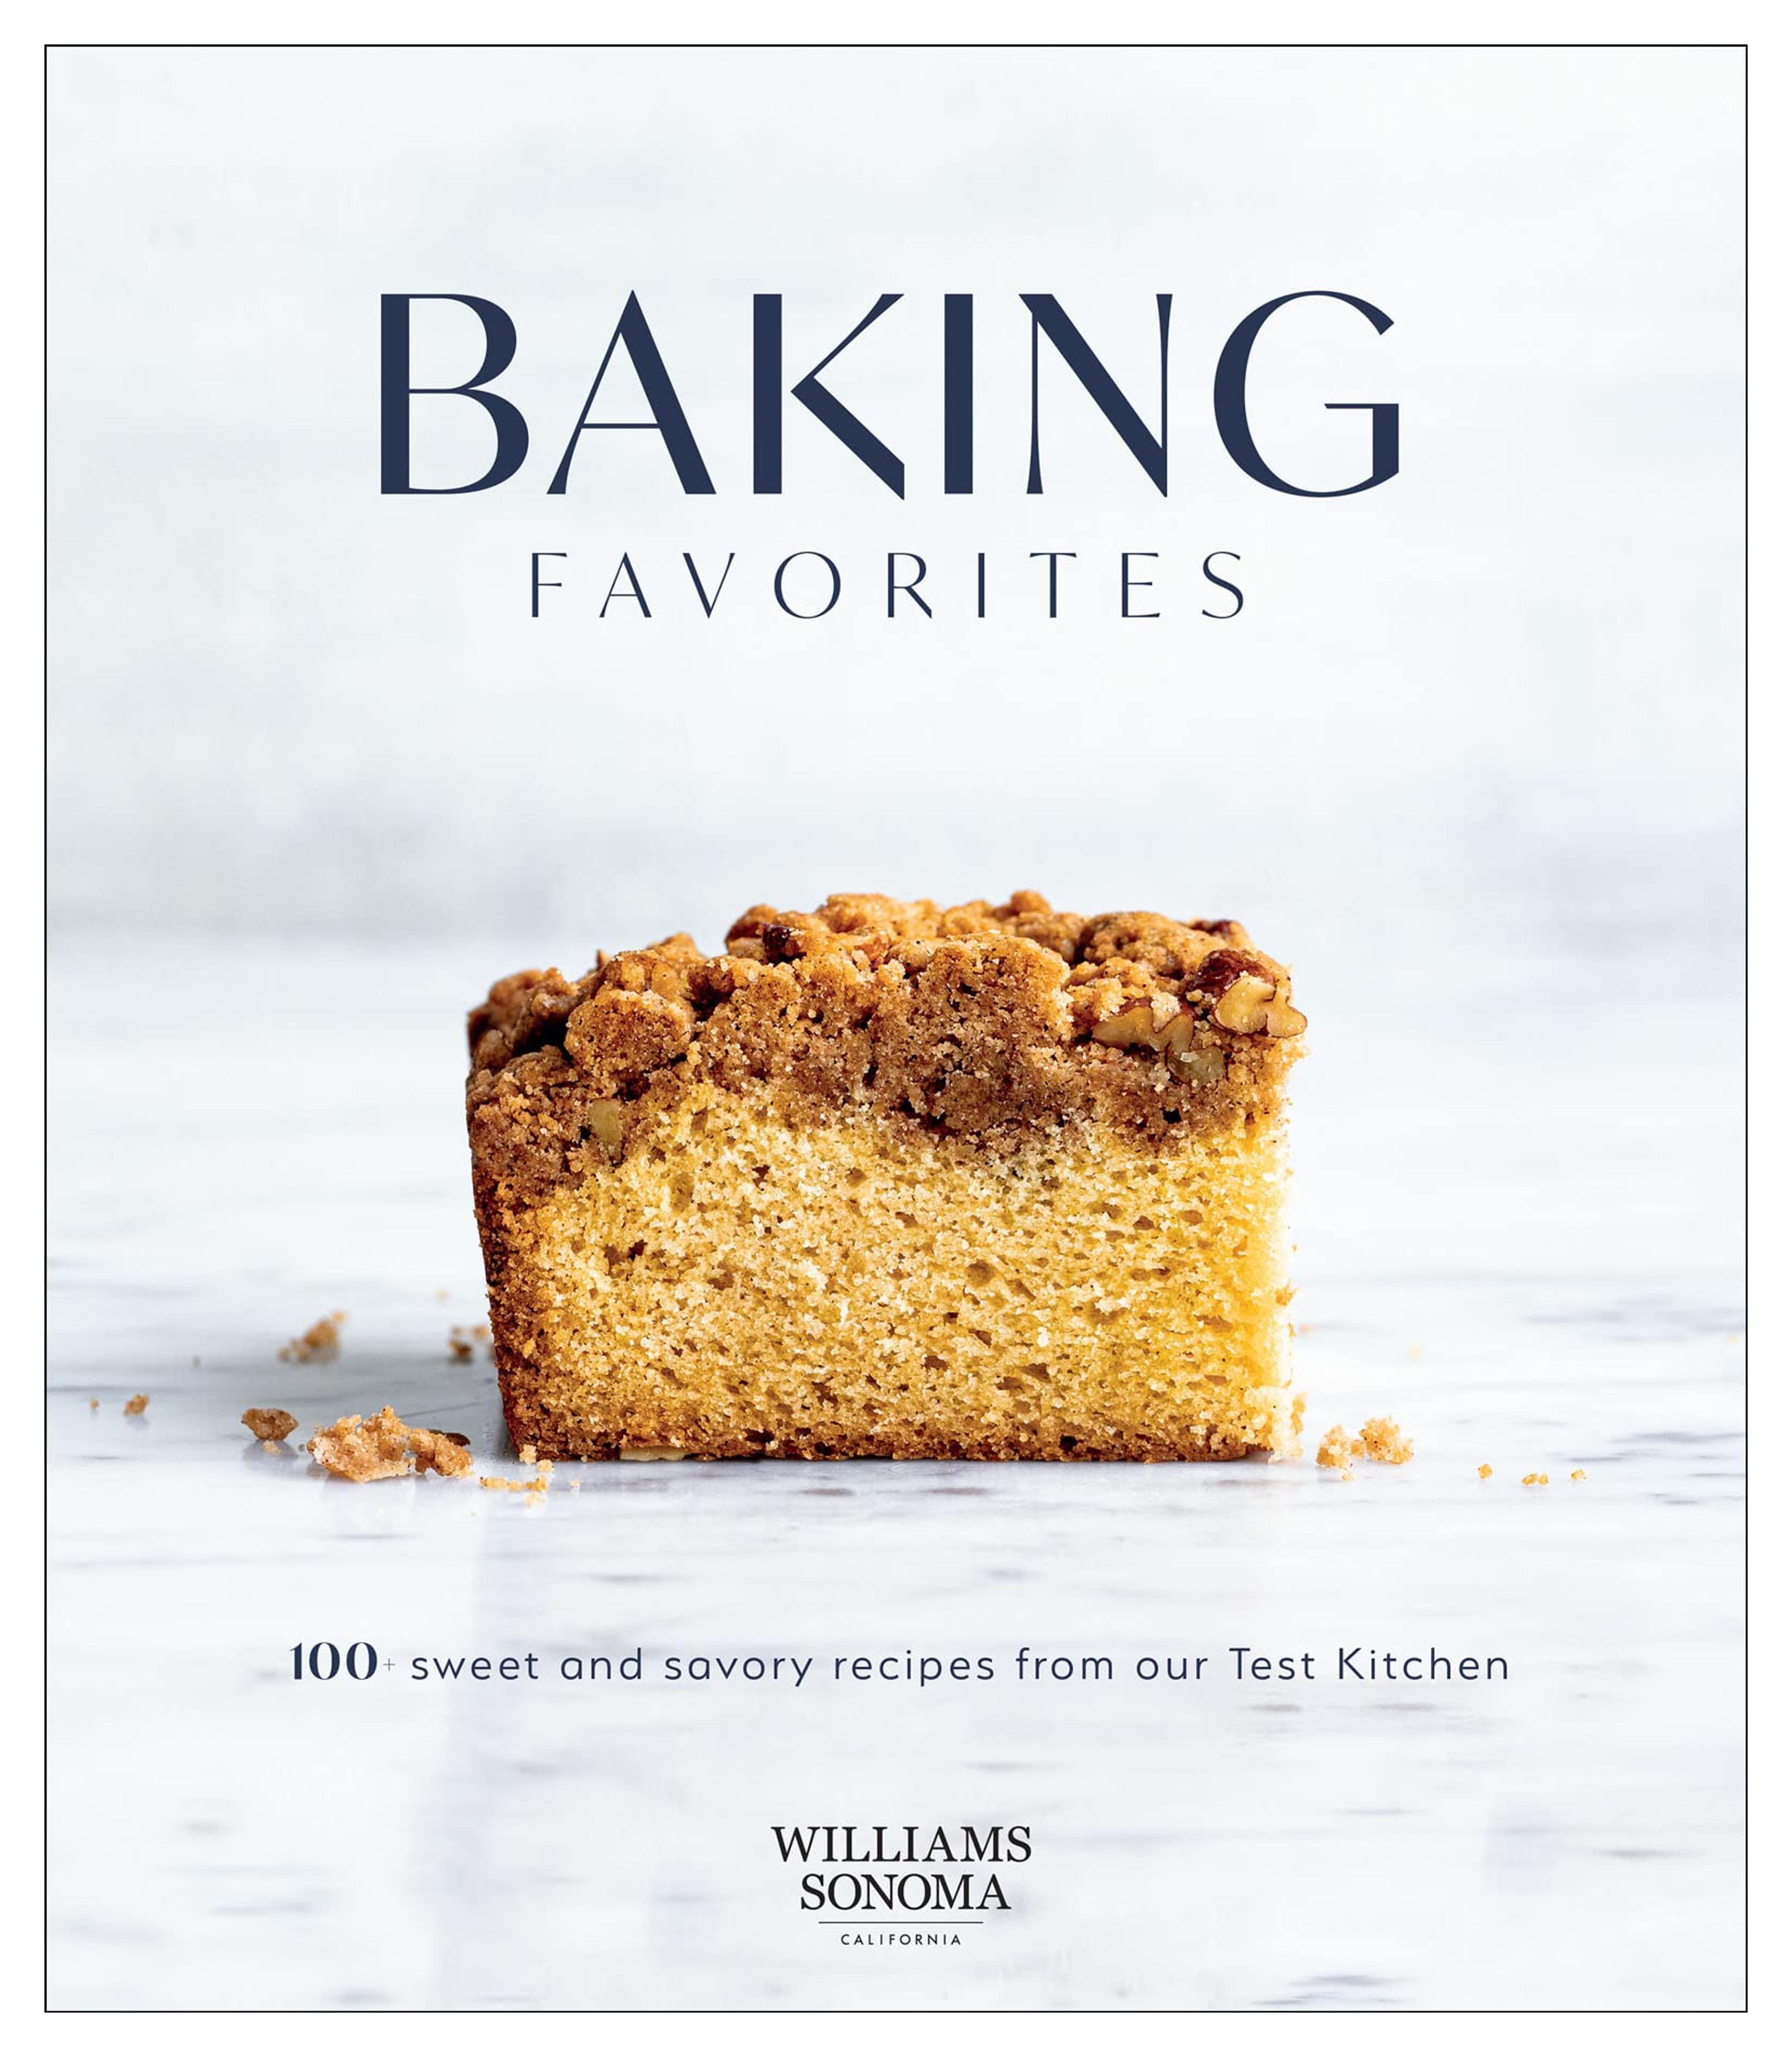 Baking Favorites: 100 Sweet and Savory Recipes from Our Test Kitchen (Williams-Sonoma) - Kindle edition by Williams Sonoma, English, Belle. Cookbooks, Food & Wine Kindle eBooks @ Amazon.com.